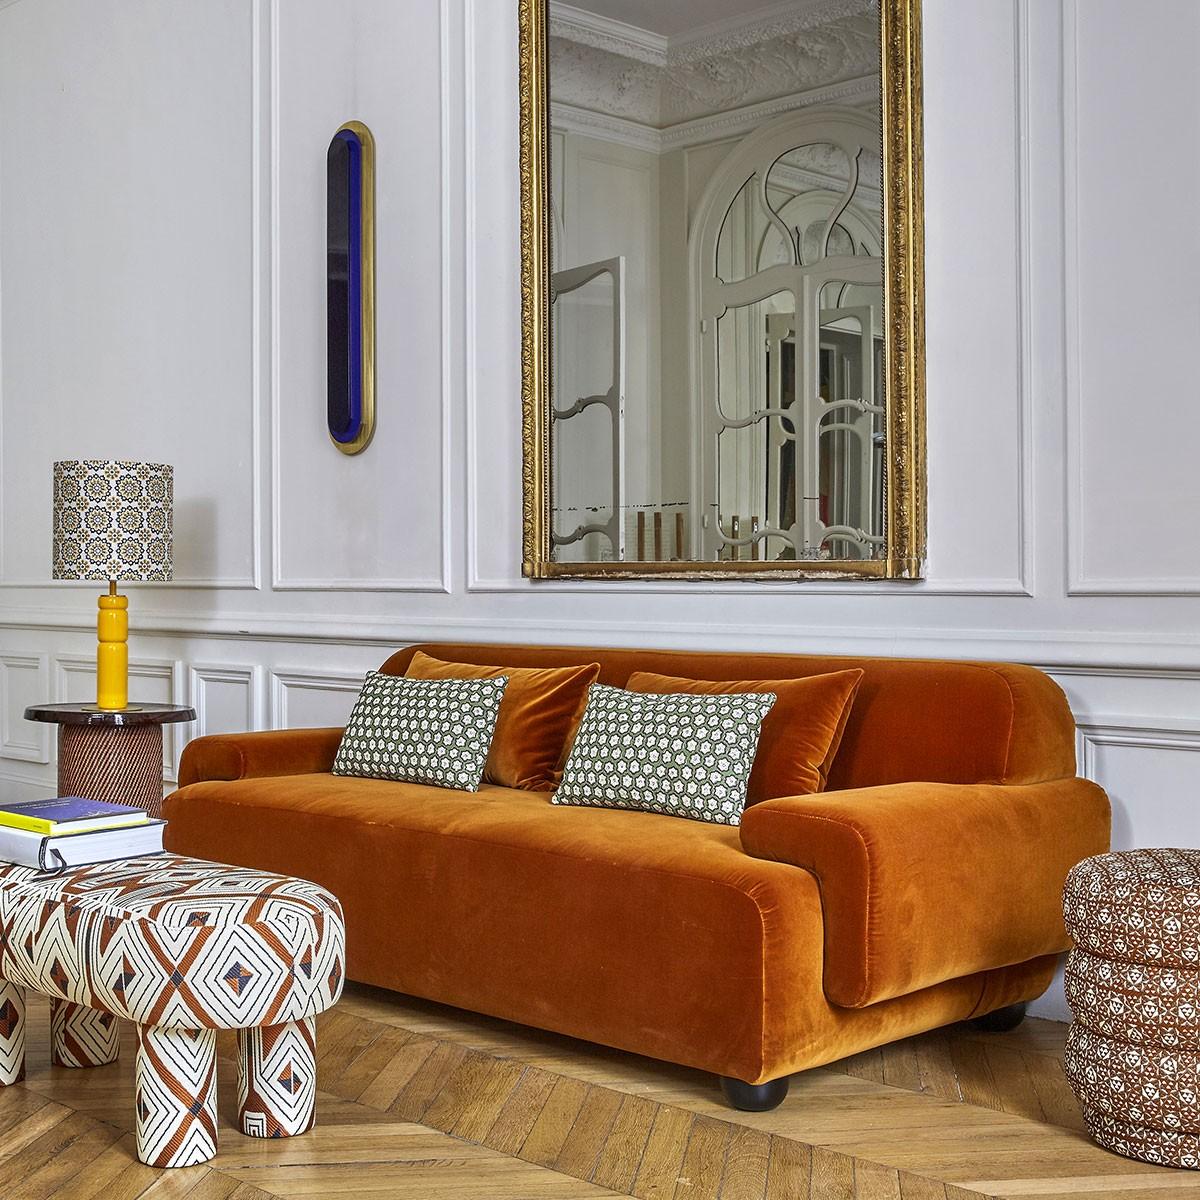 Popus editions lena 4 seater sofa in apricot cork linen upholstery.

It looks like it's straight out of a movie, with its generous curves and wide armrests. It is a real invitation to spend long Sundays with the family, comfortably seated in front